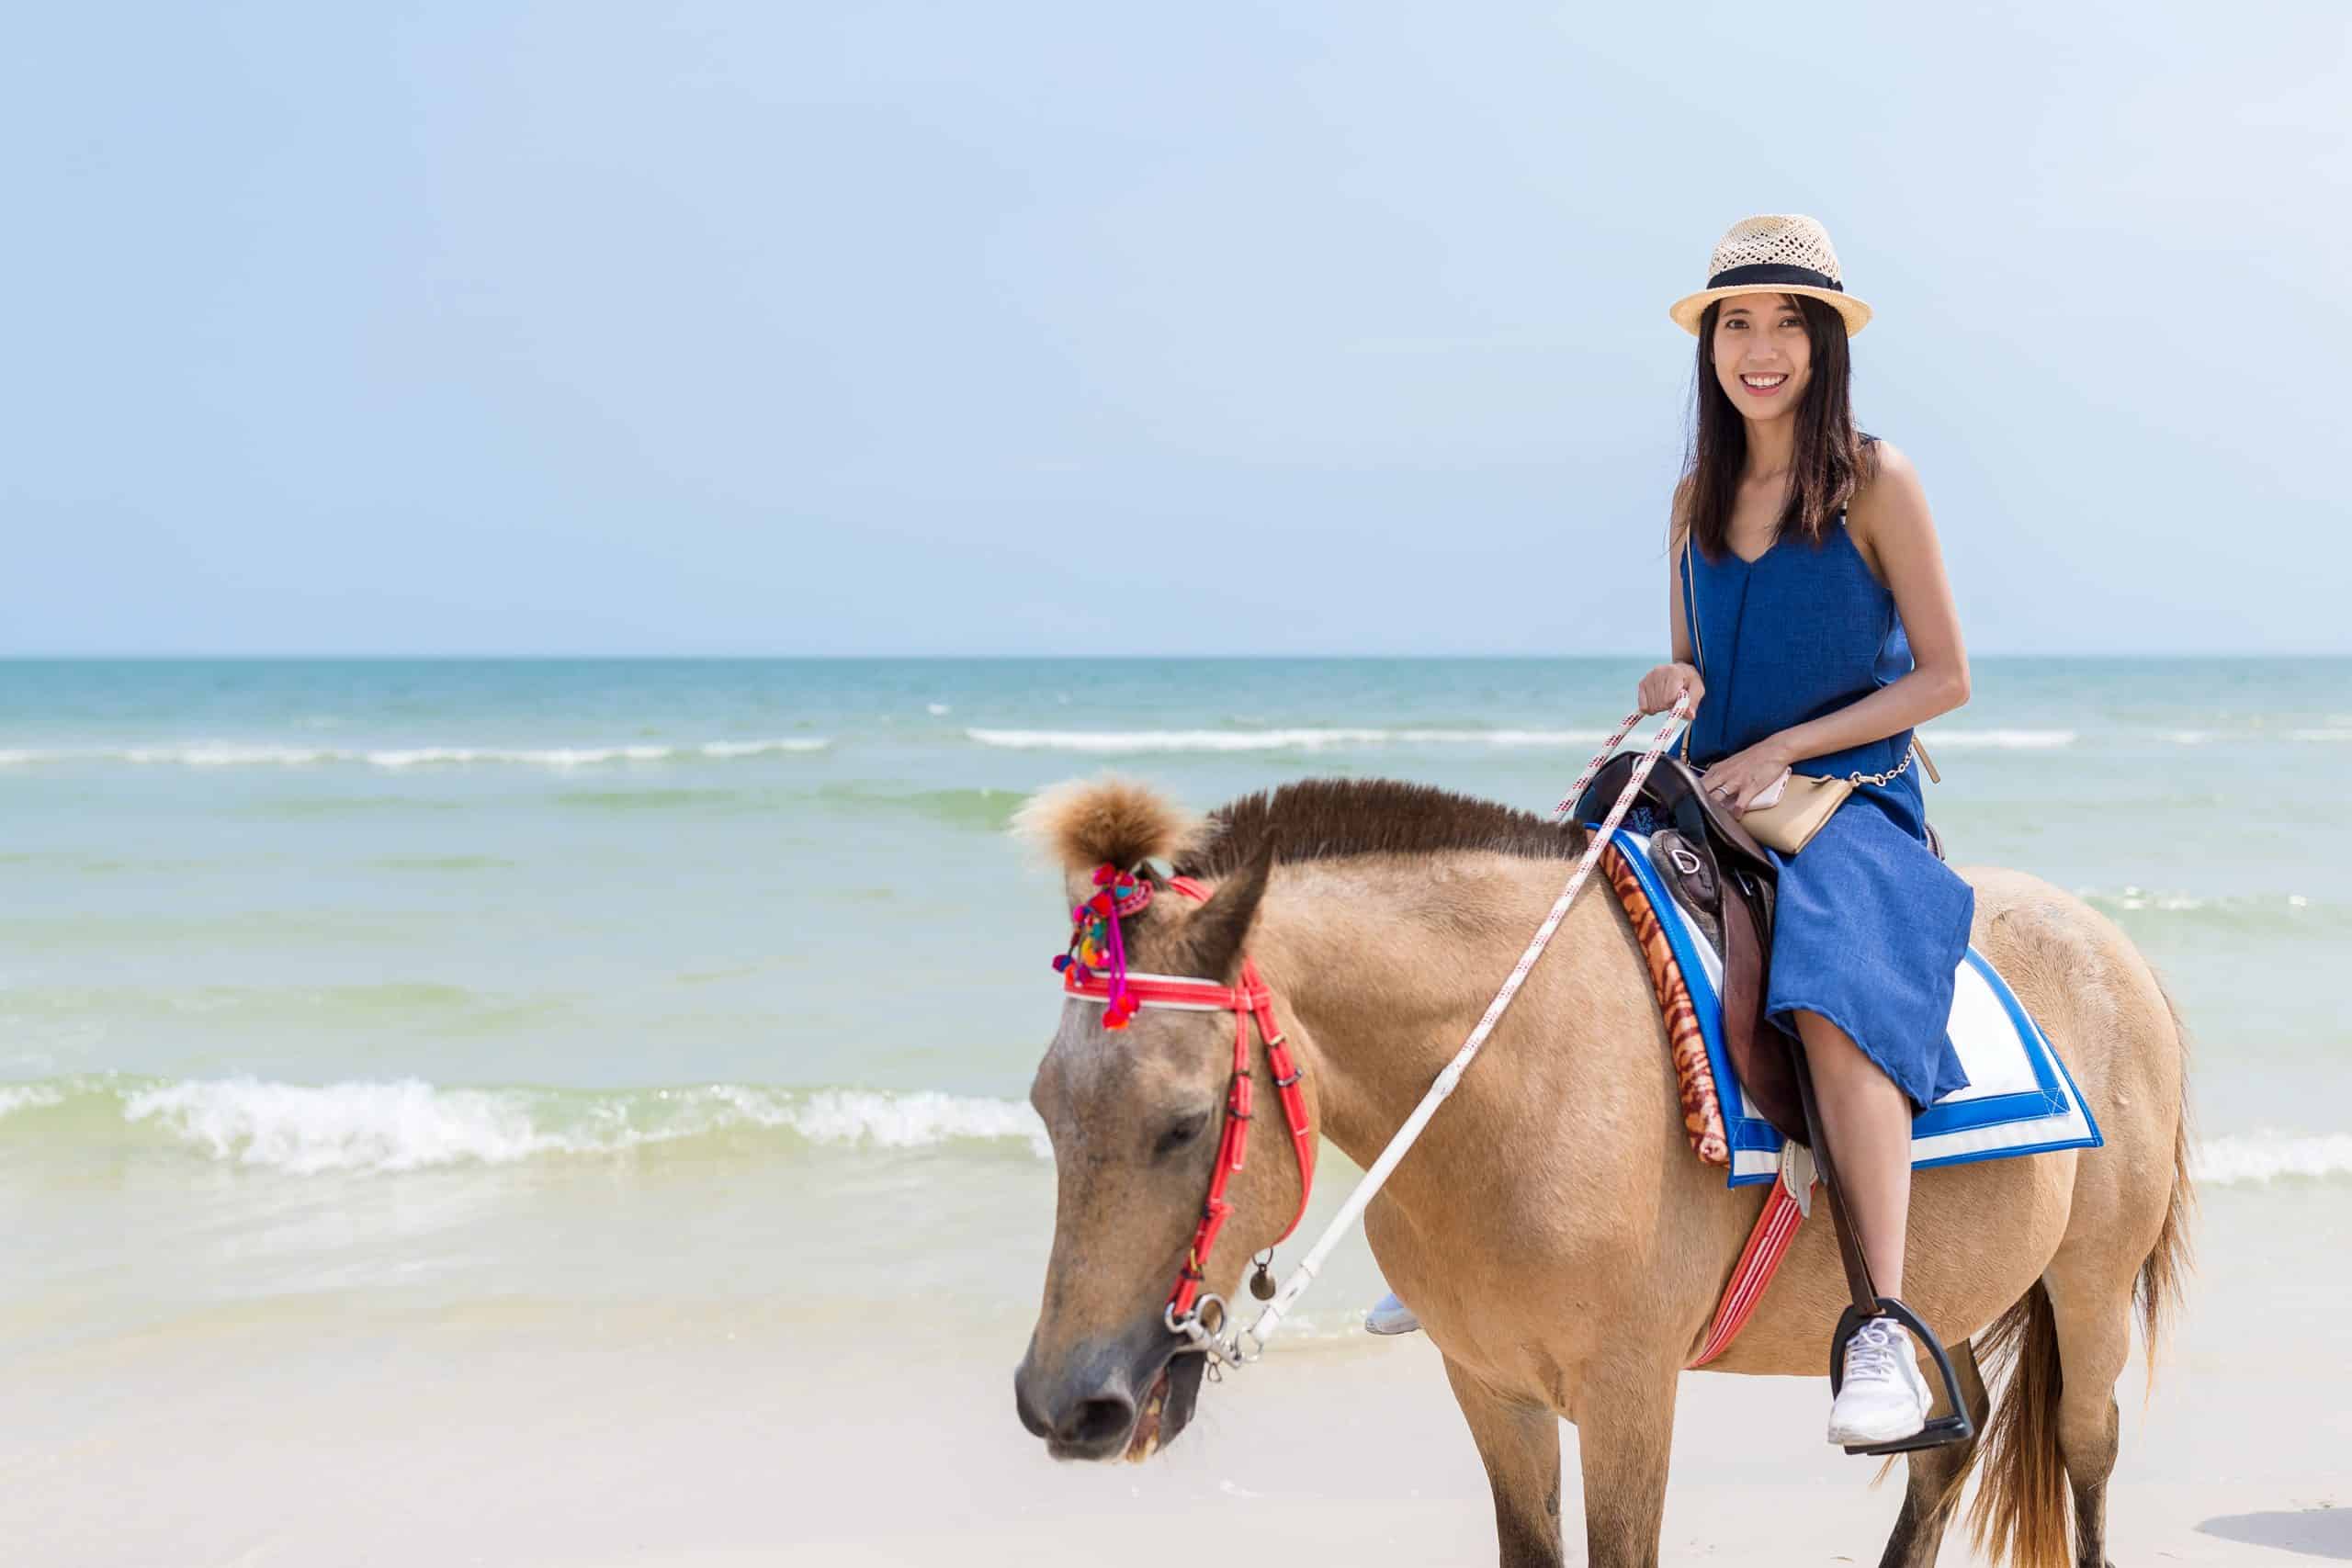 Woman riding horse in the sand beach